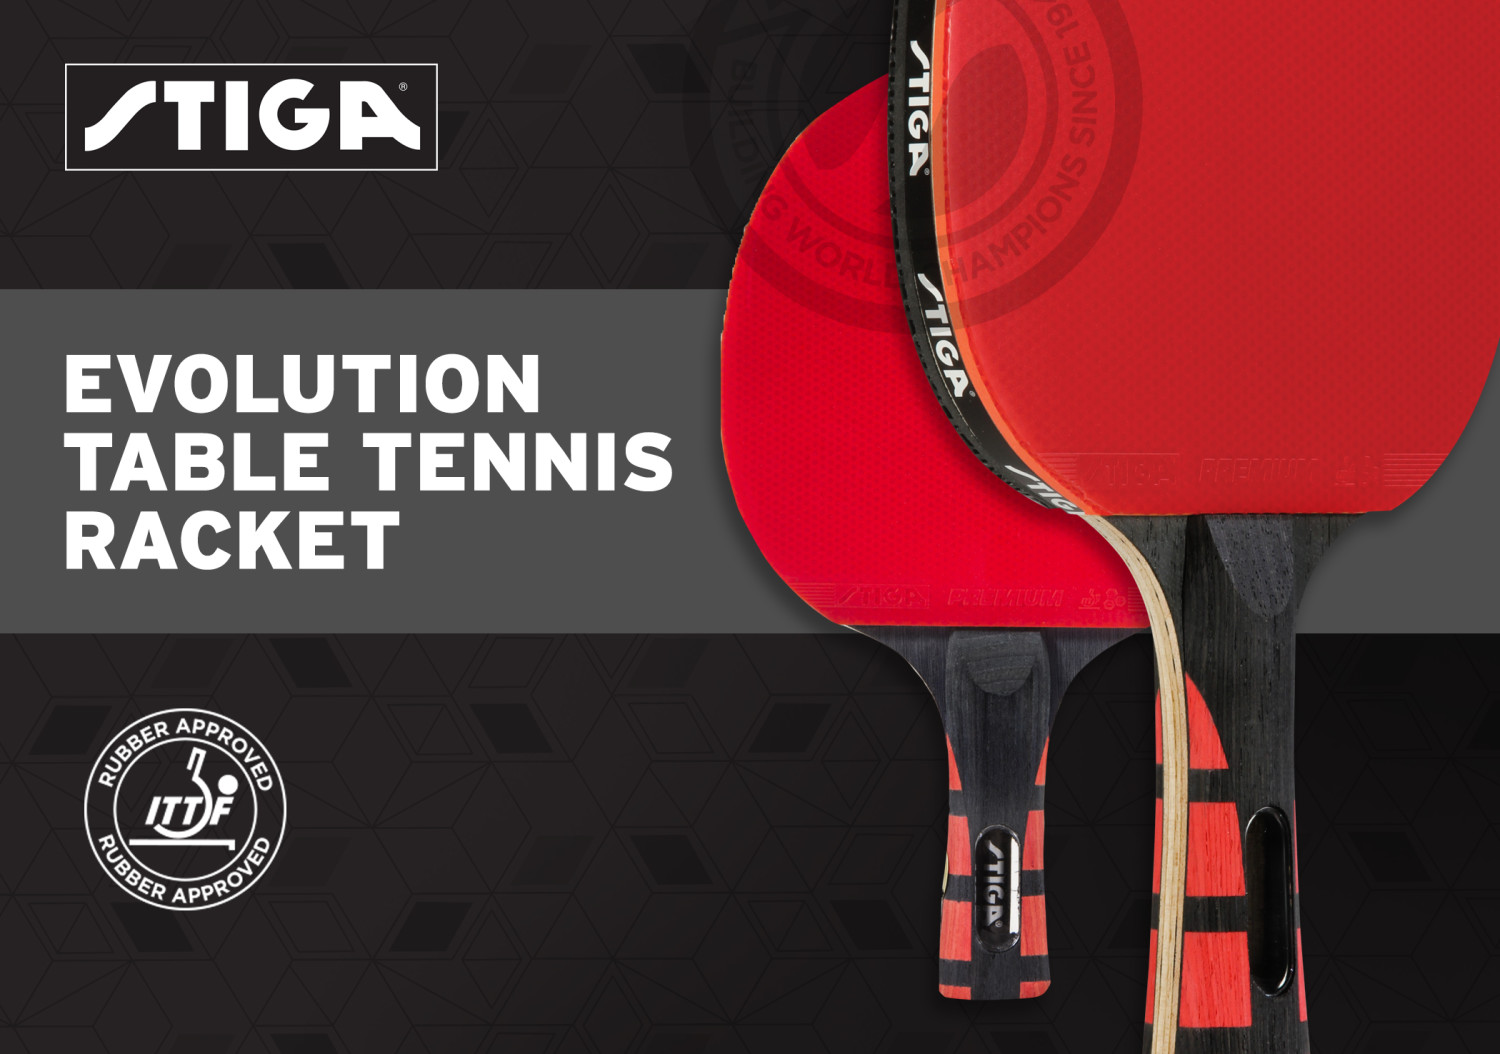 STIGA Evolution Performance-Level Table Tennis Racket Made with Approved Rubber for Tournament Play - image 2 of 15